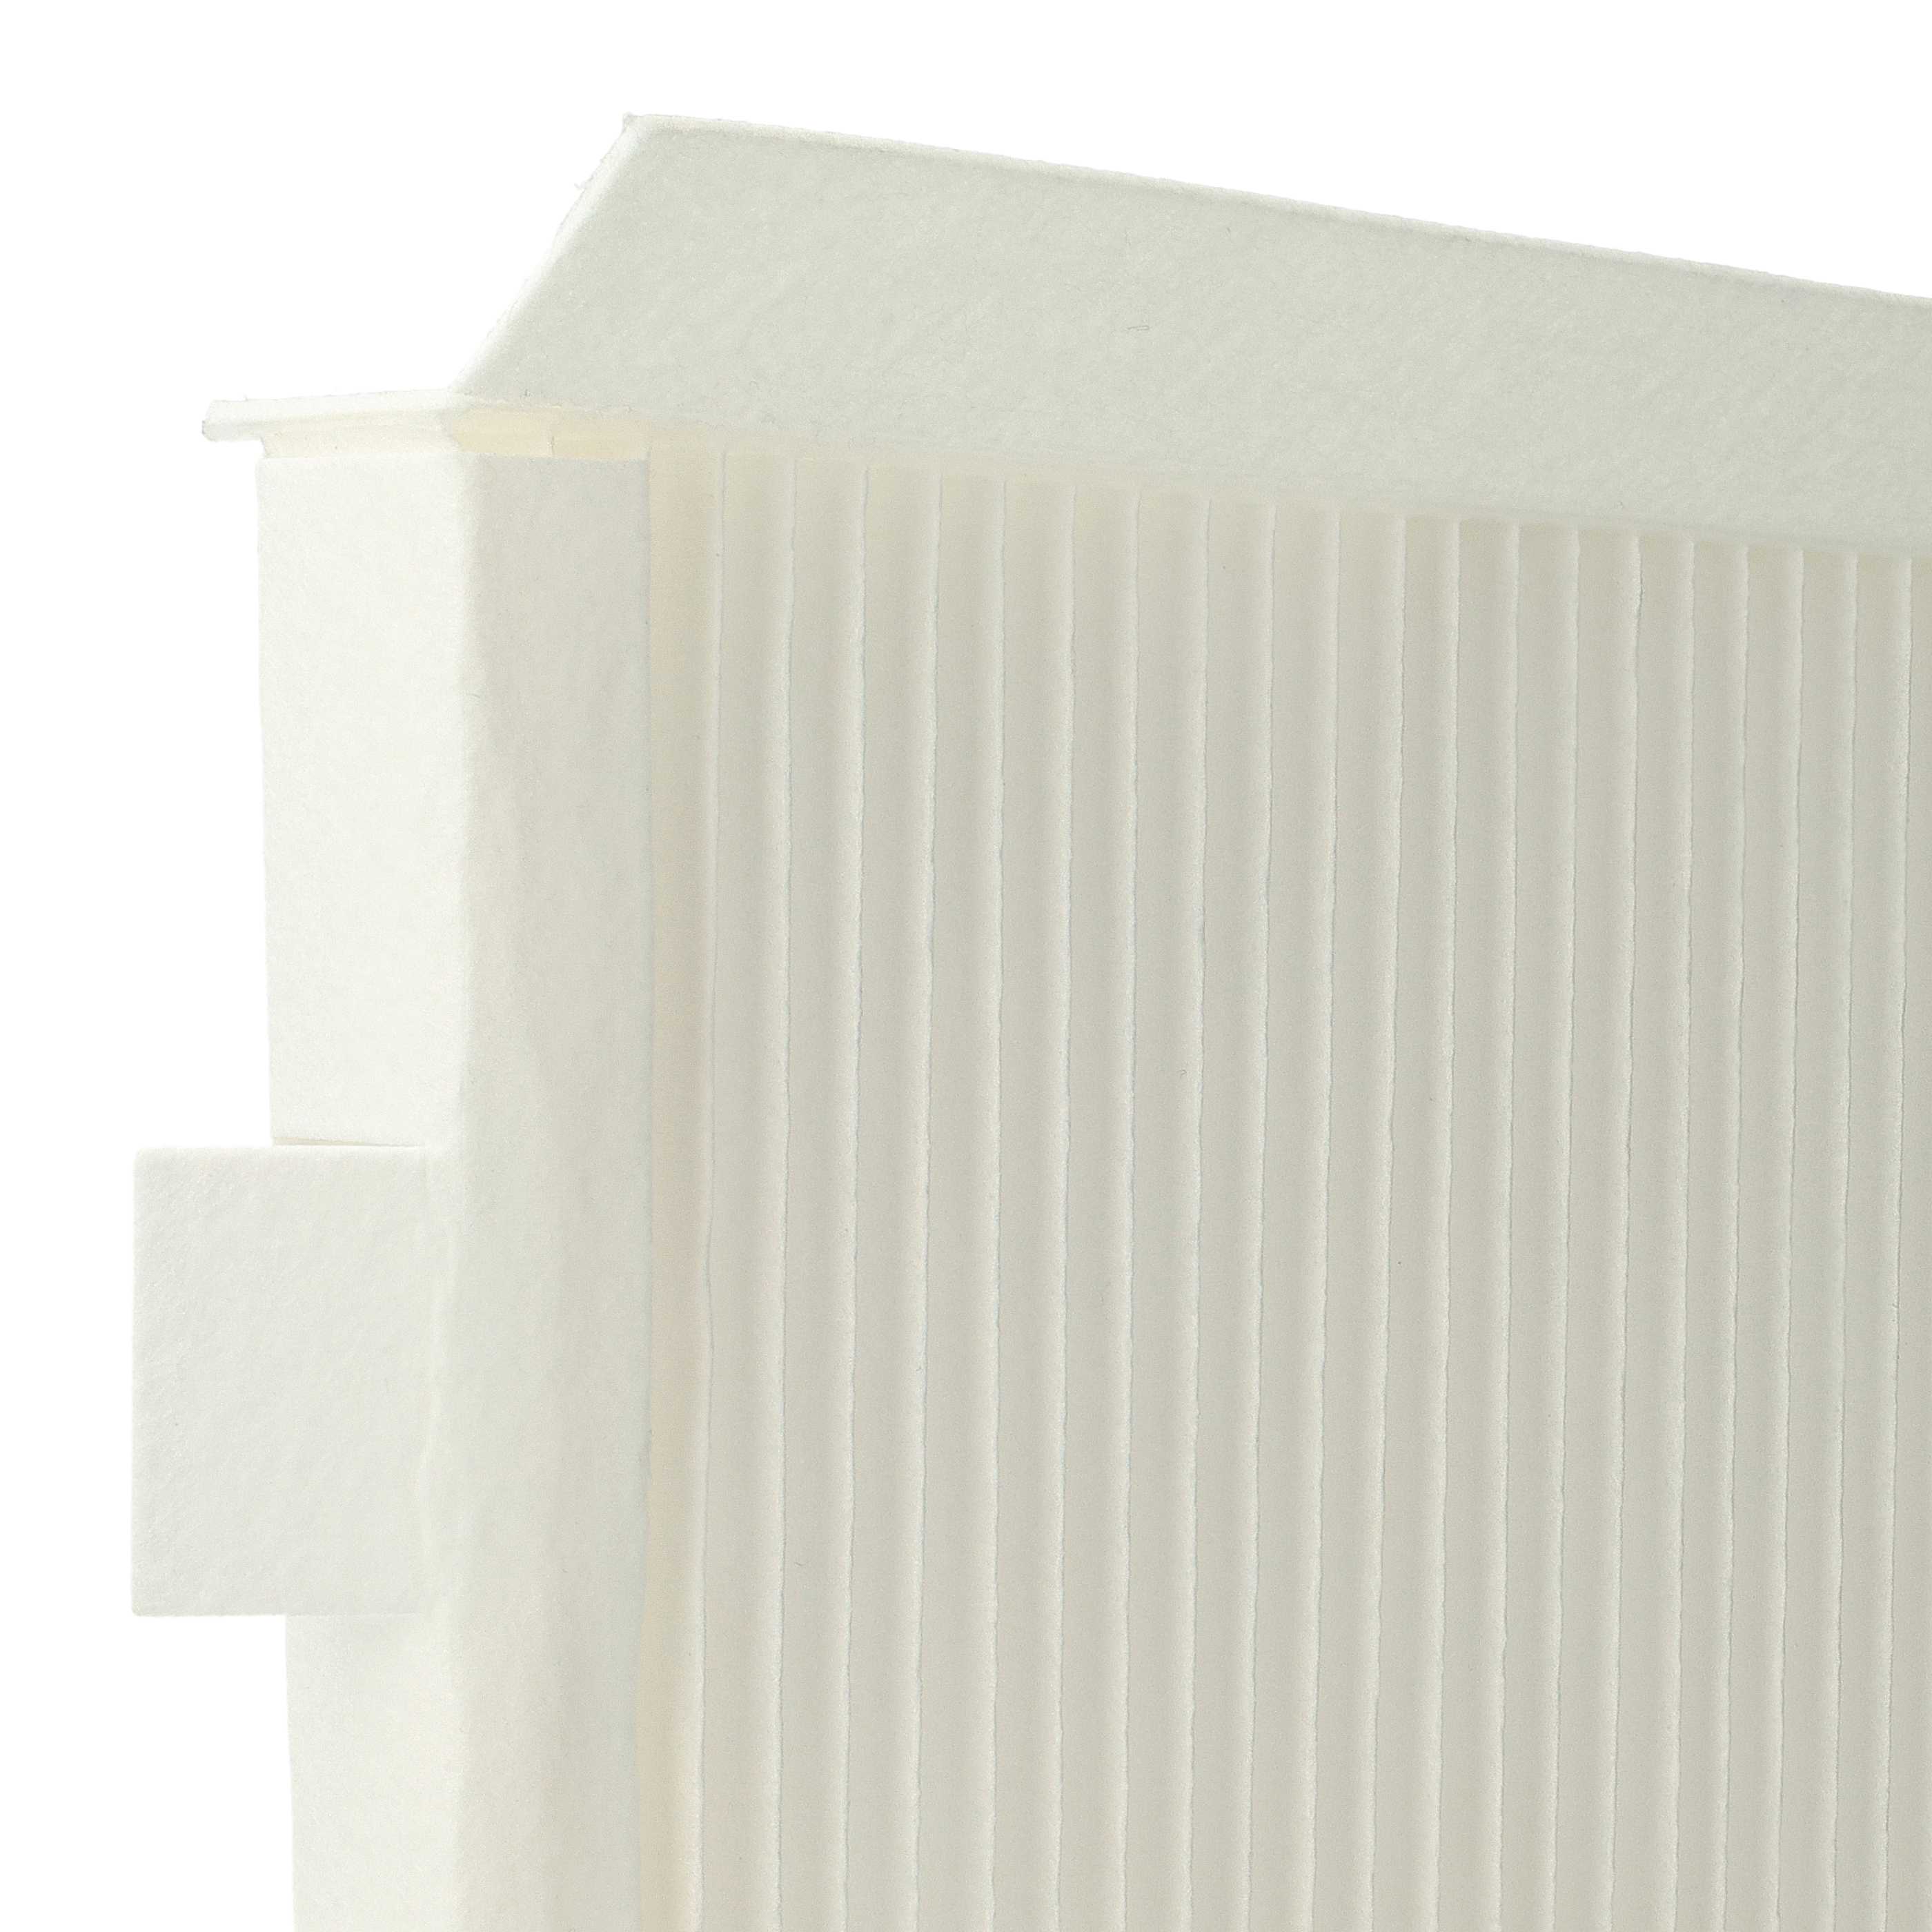 Air Filter Set Replacement for Zehnder 400100091 for Ventilation Devices - G4 / F7